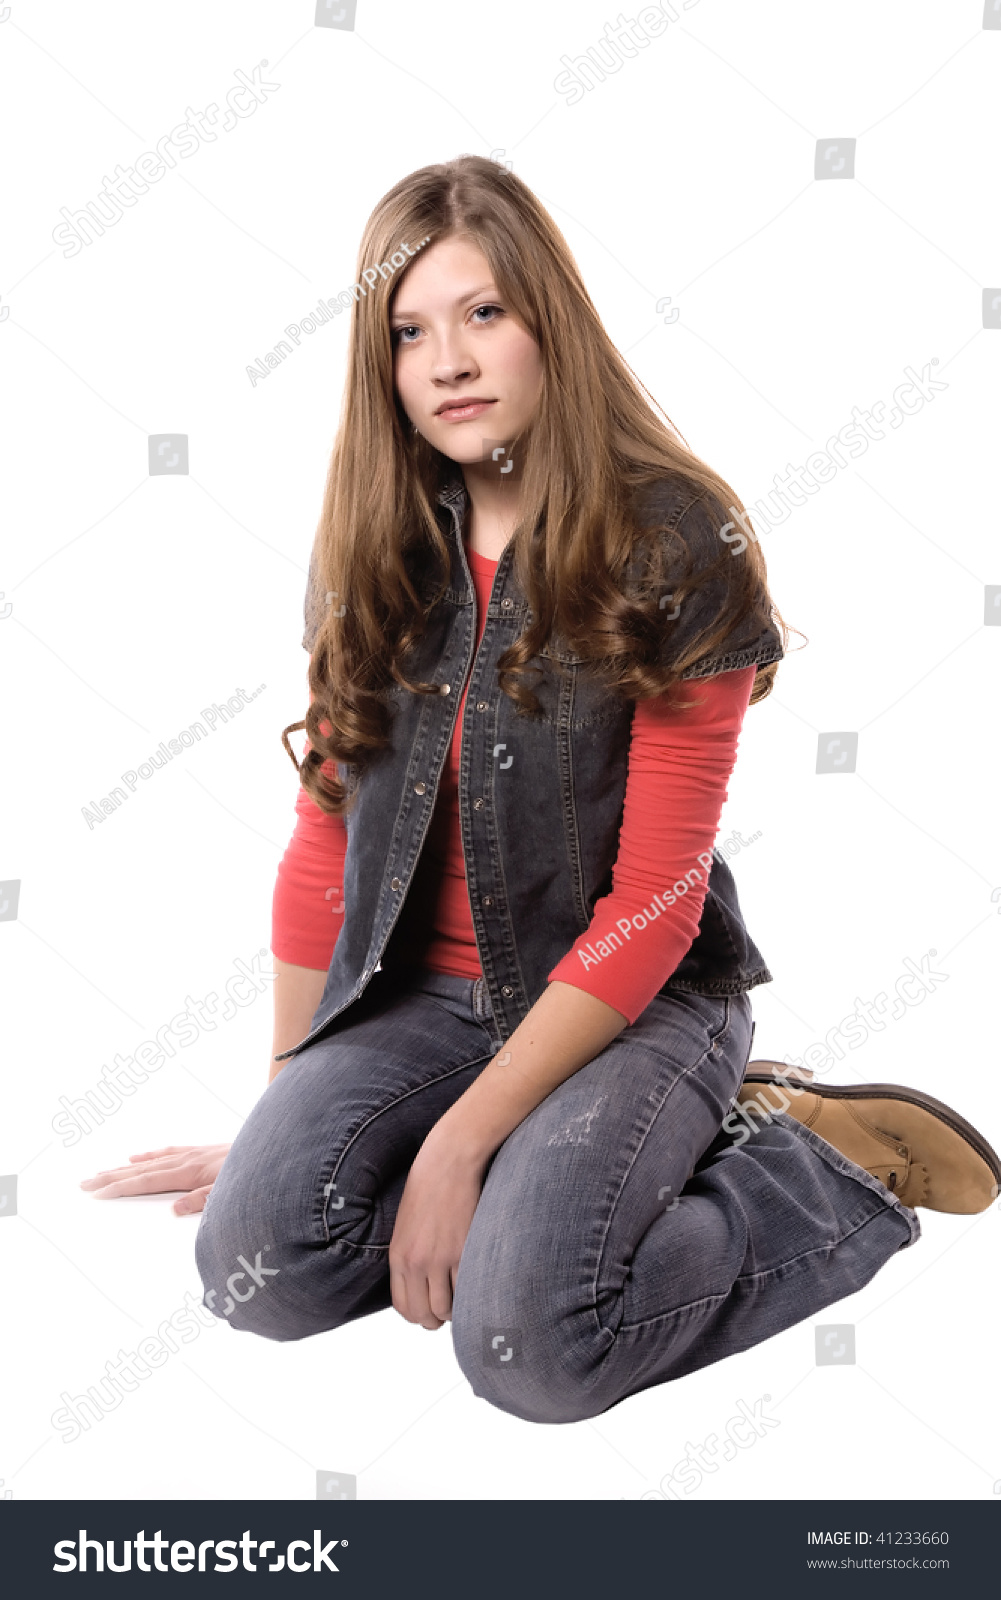 A Woman Sitting With A Sad And Serious Look On Her Face. Stock Photo ...